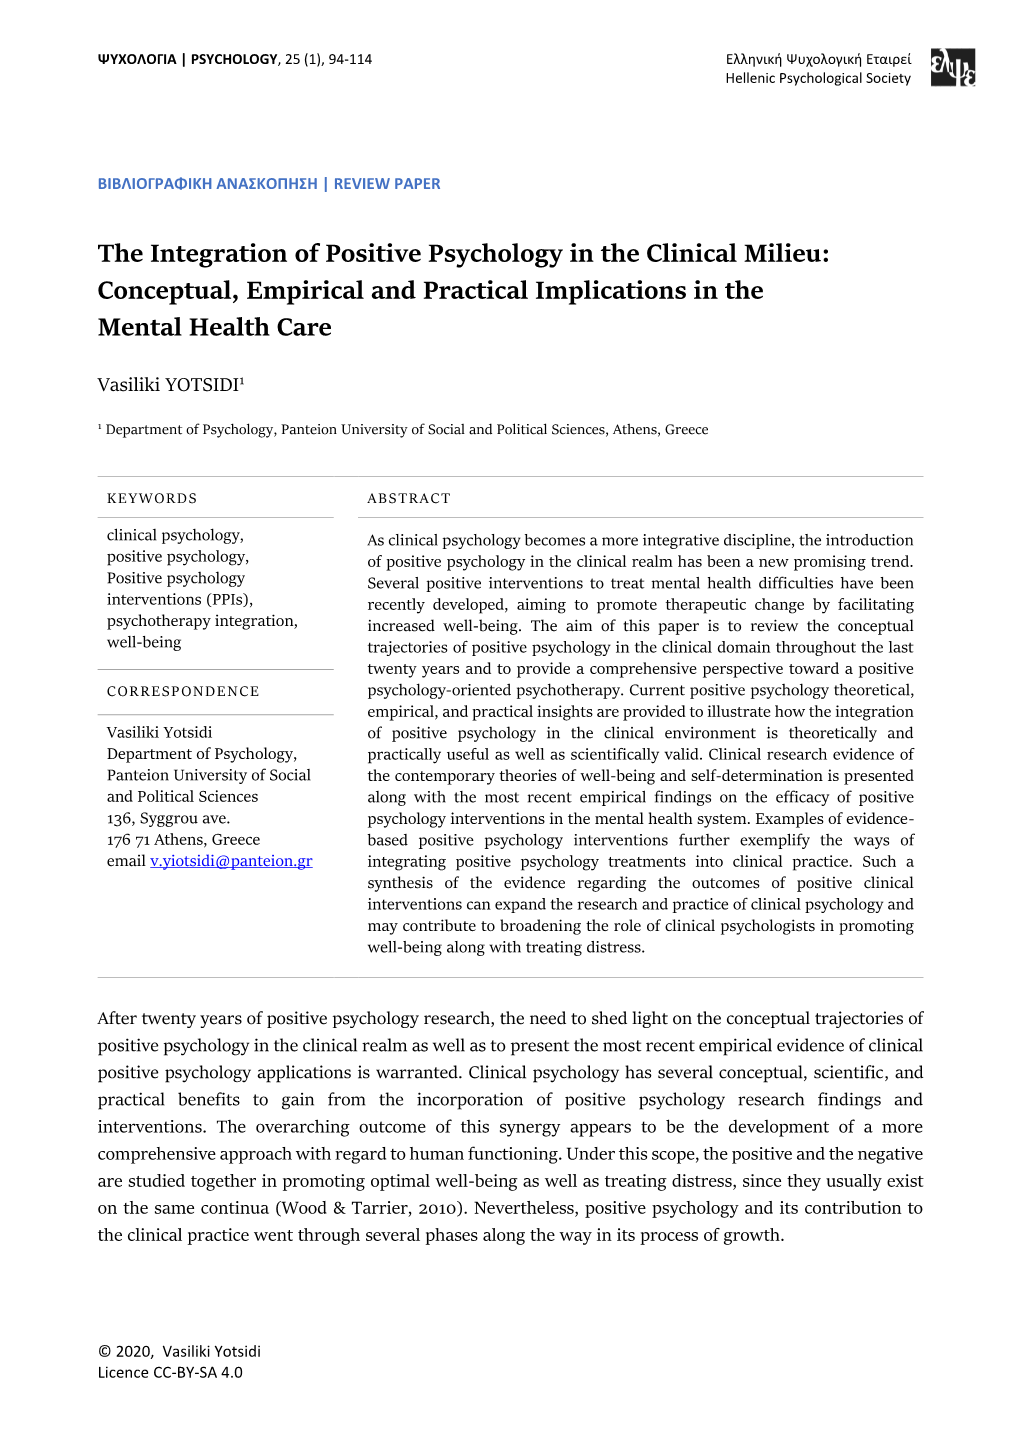 The Integration of Positive Psychology in the Clinical Milieu: Conceptual, Empirical and Practical Implications in the Mental Health Care